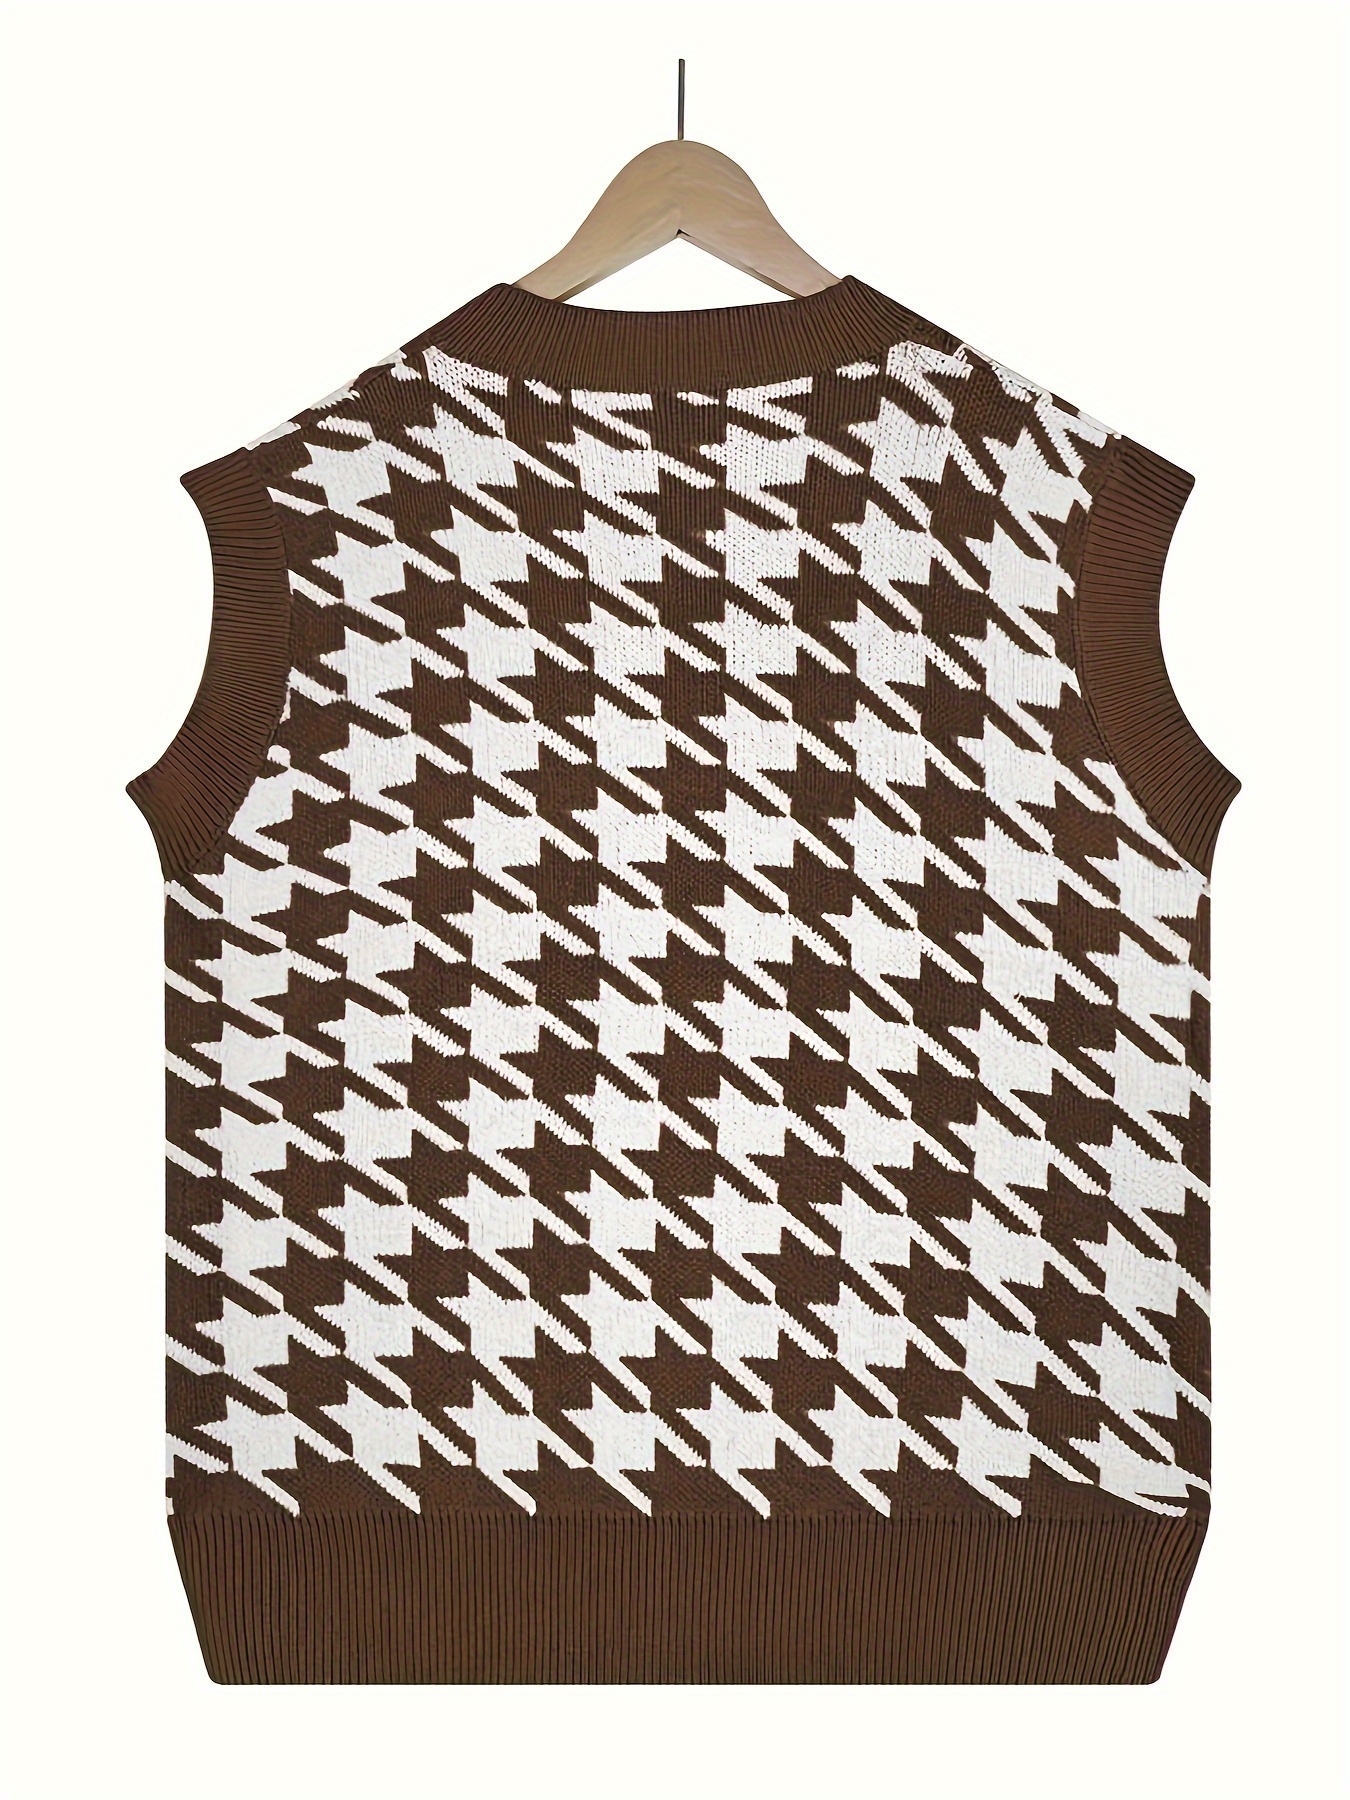 Houndstooth V Neck Knitted Vest, Vintage Sleeveless Loose Sweater, Women's  Clothing